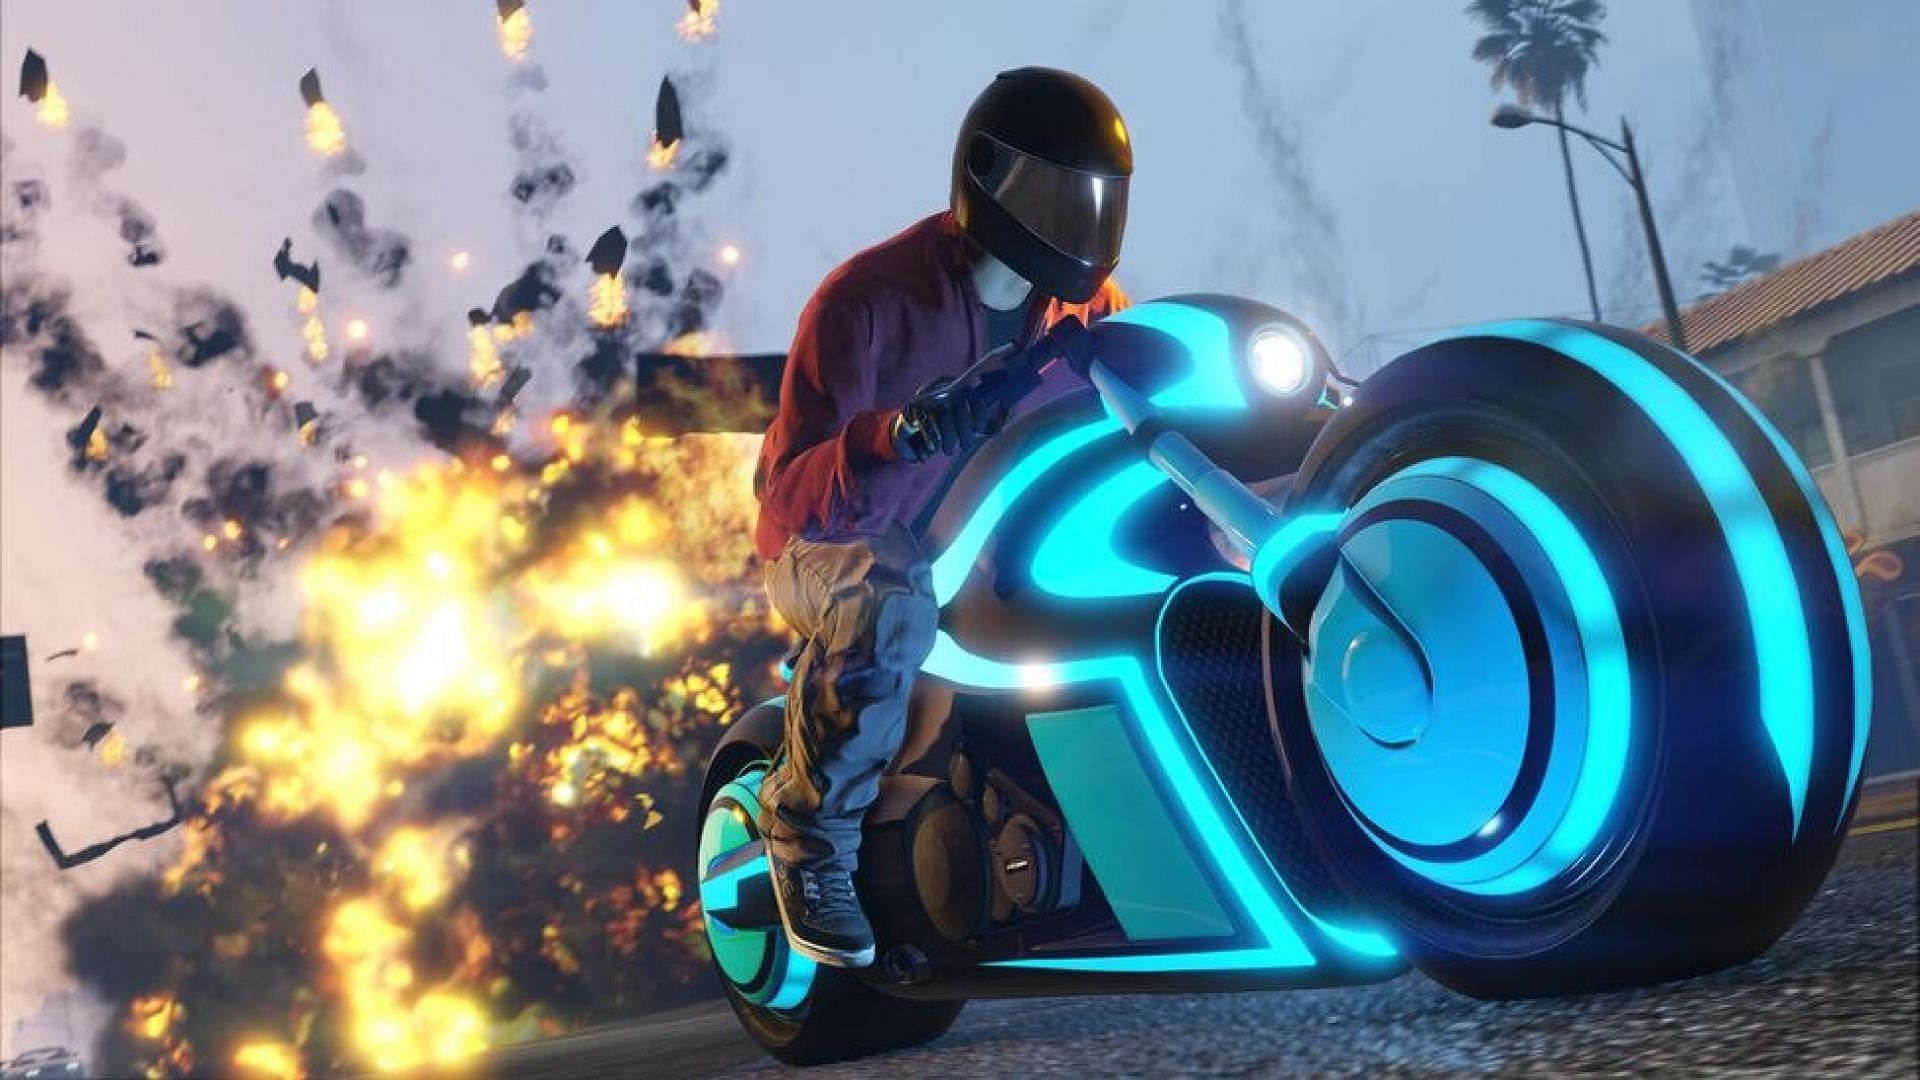 The GTA 5 Story has many awesome bikes to choose from [Image via Gamers Decide]